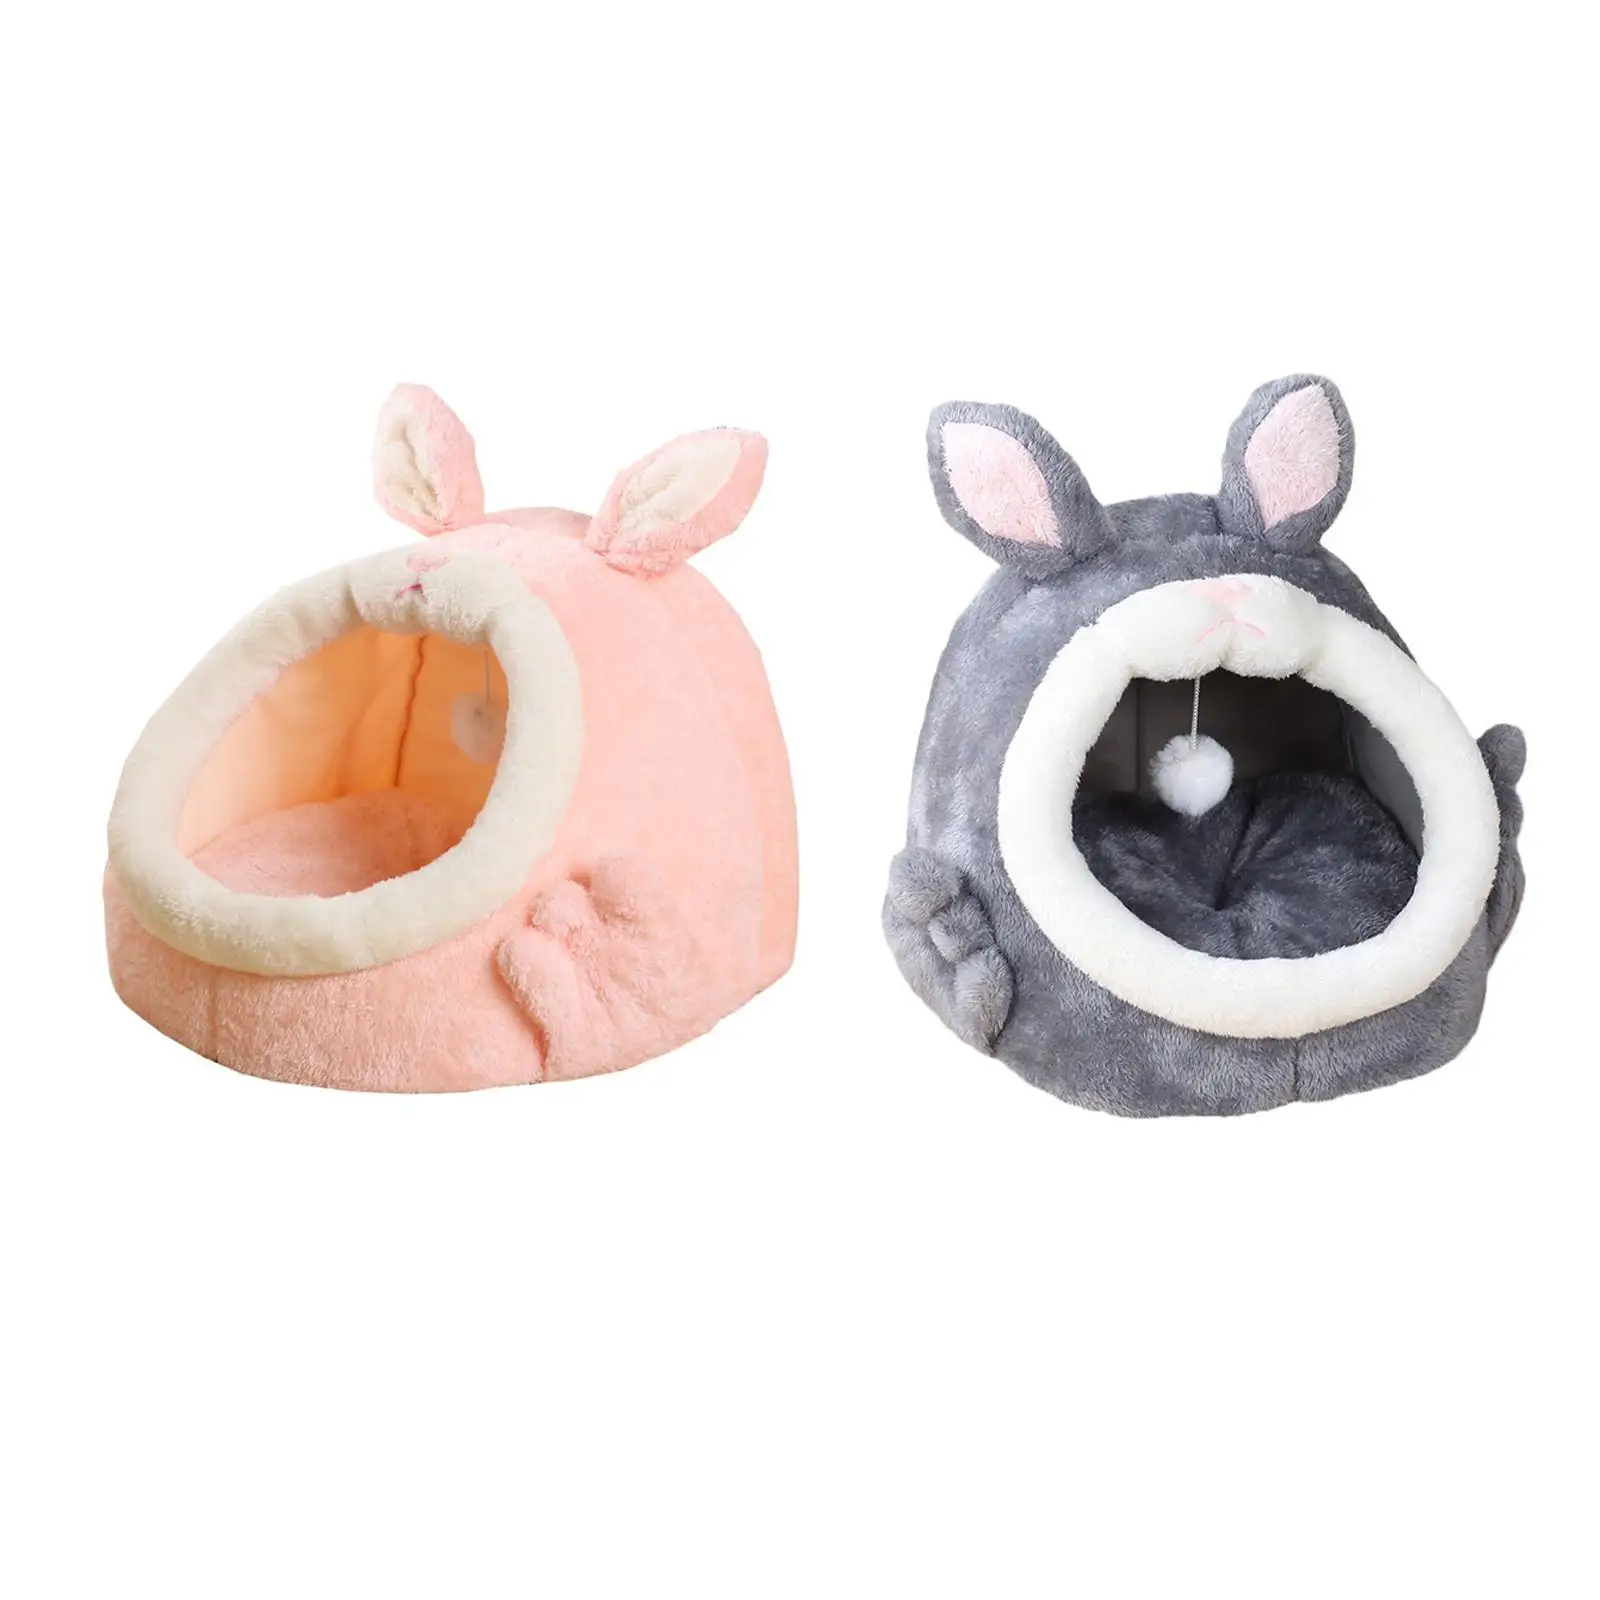 Cats Cave Bed Cat House Nest Bed Pet Bed Soft Thick Cushion with Ball Toy for Small Dog Puppy Indoor Cats Rabbits Pet Pig